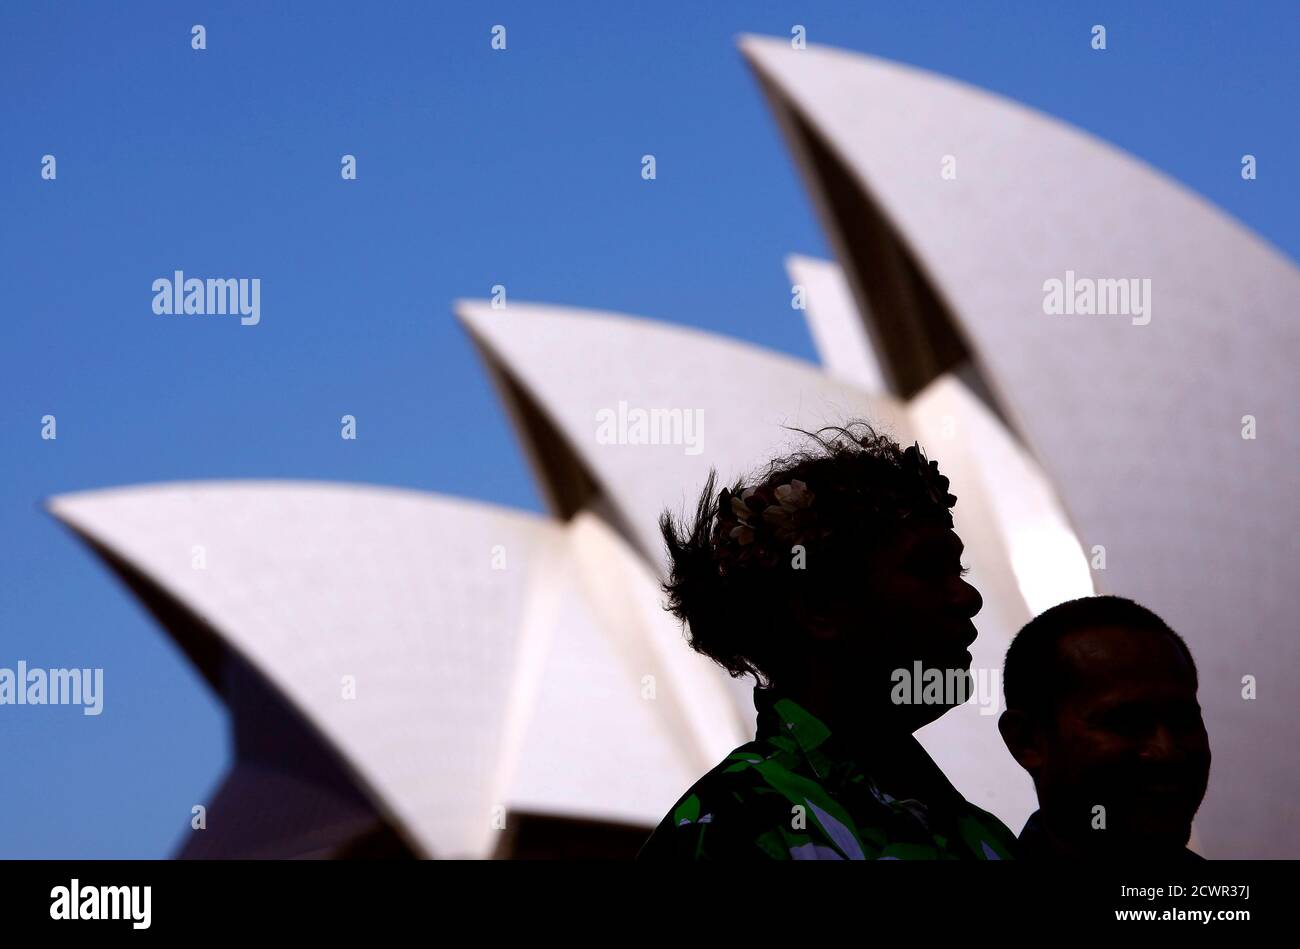 Representatives from South Pacific nations Kaio Tiira Taula (L) from Tuvalu and Seia Mikaele Maiava from Tokelau stand together during an official launch of their campaign against the coal industry in front of the Sydney Opera House October 9, 2014. The group, calling themselves the 'Pacific Climate Warriors', and representing 12 Pacific Island nation states, are preparing to blockade the world?s largest coal port in Newcastle on October 17 with a flotilla of traditional canoes.   REUTERS/David Gray      (AUSTRALIA - Tags: CIVIL UNREST ENVIRONMENT) Stock Photo